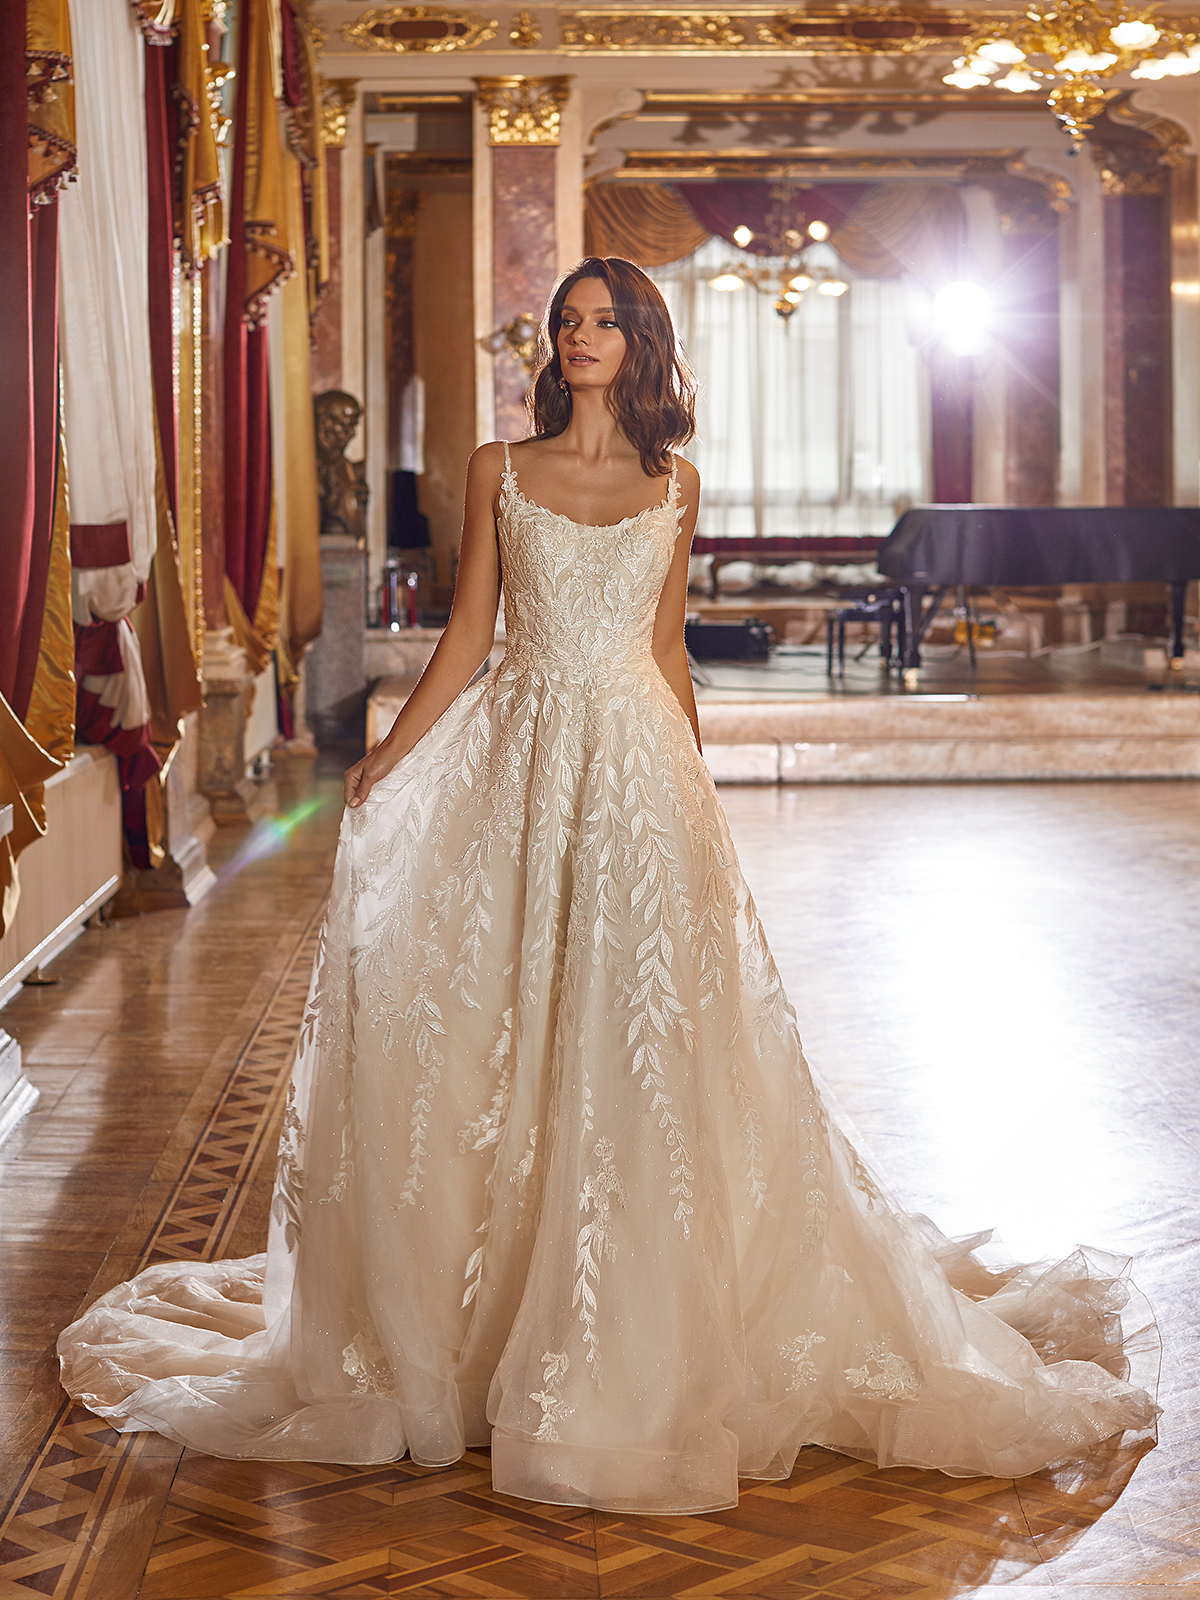 The perfect wedding dress styles for… bigger busts - BLOG